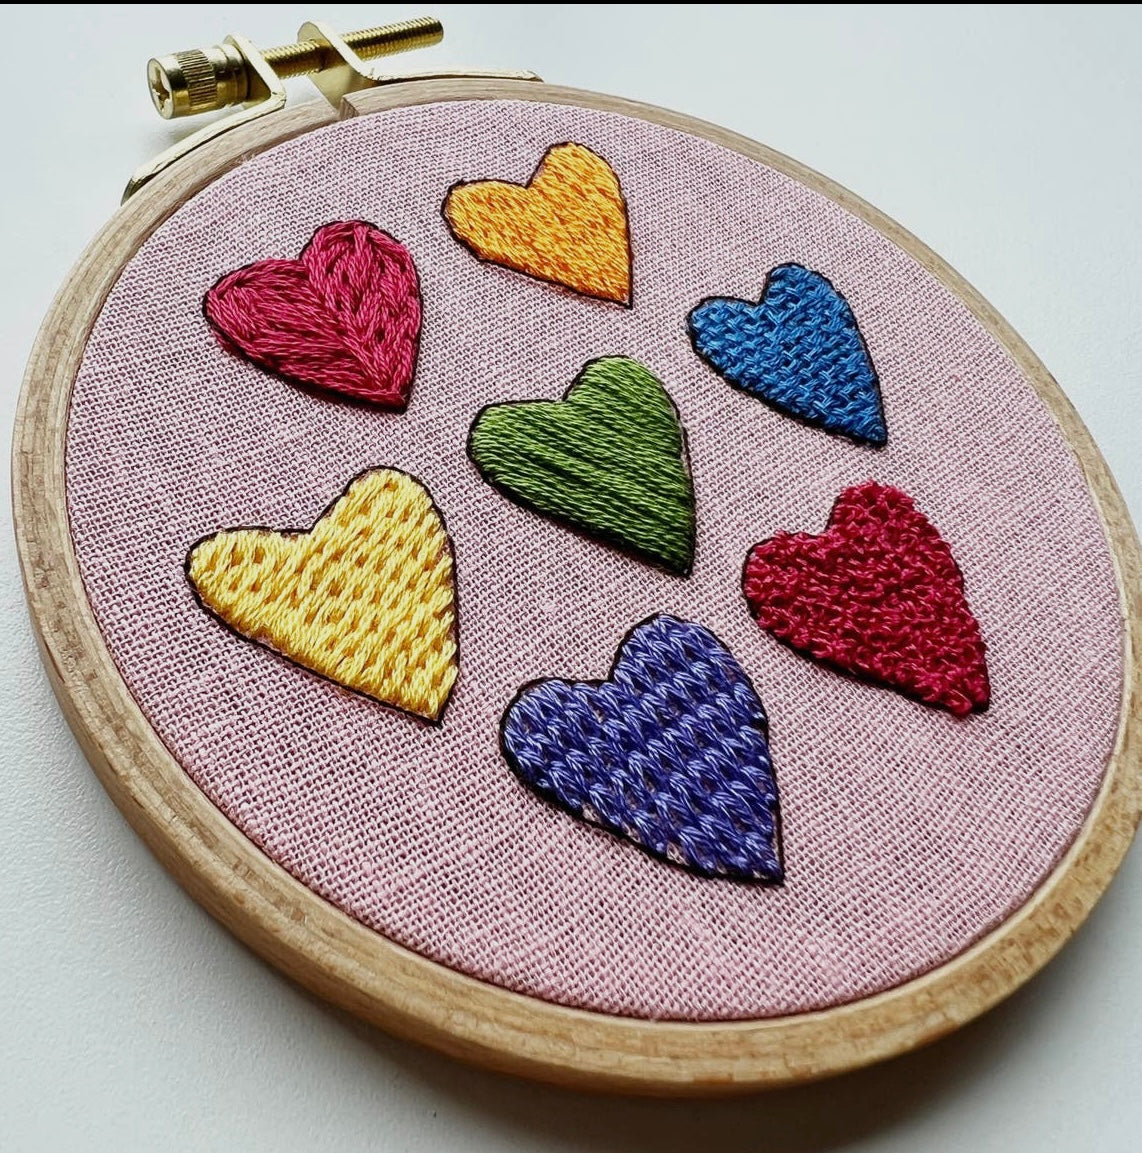 I Heart Stitching Hand Embroidery Kit For Beginners